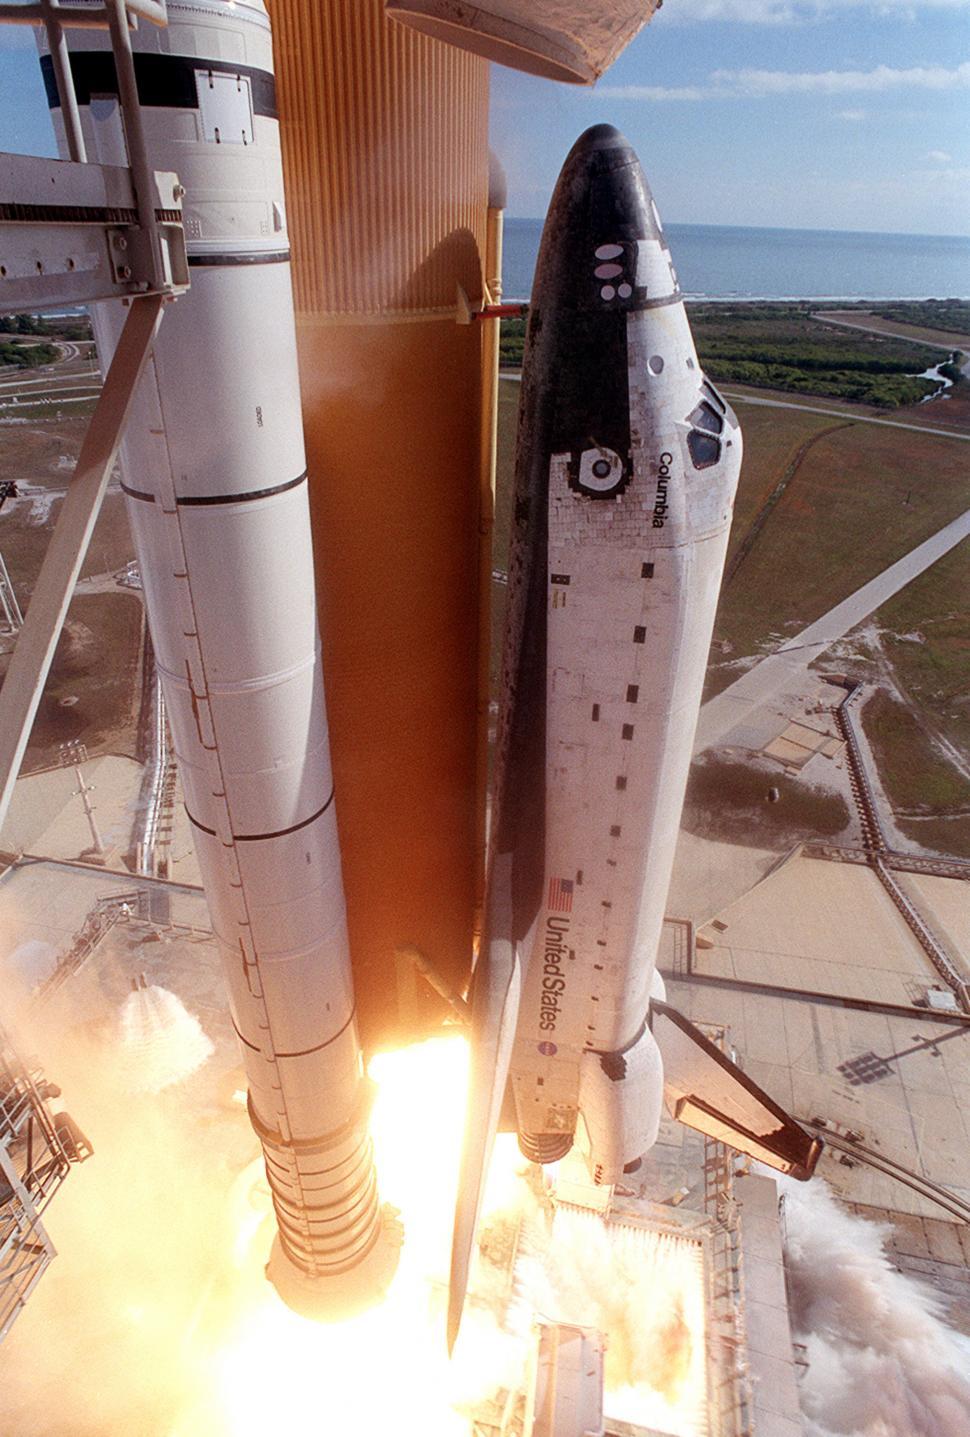 Free Image of Space Shuttle Launch 